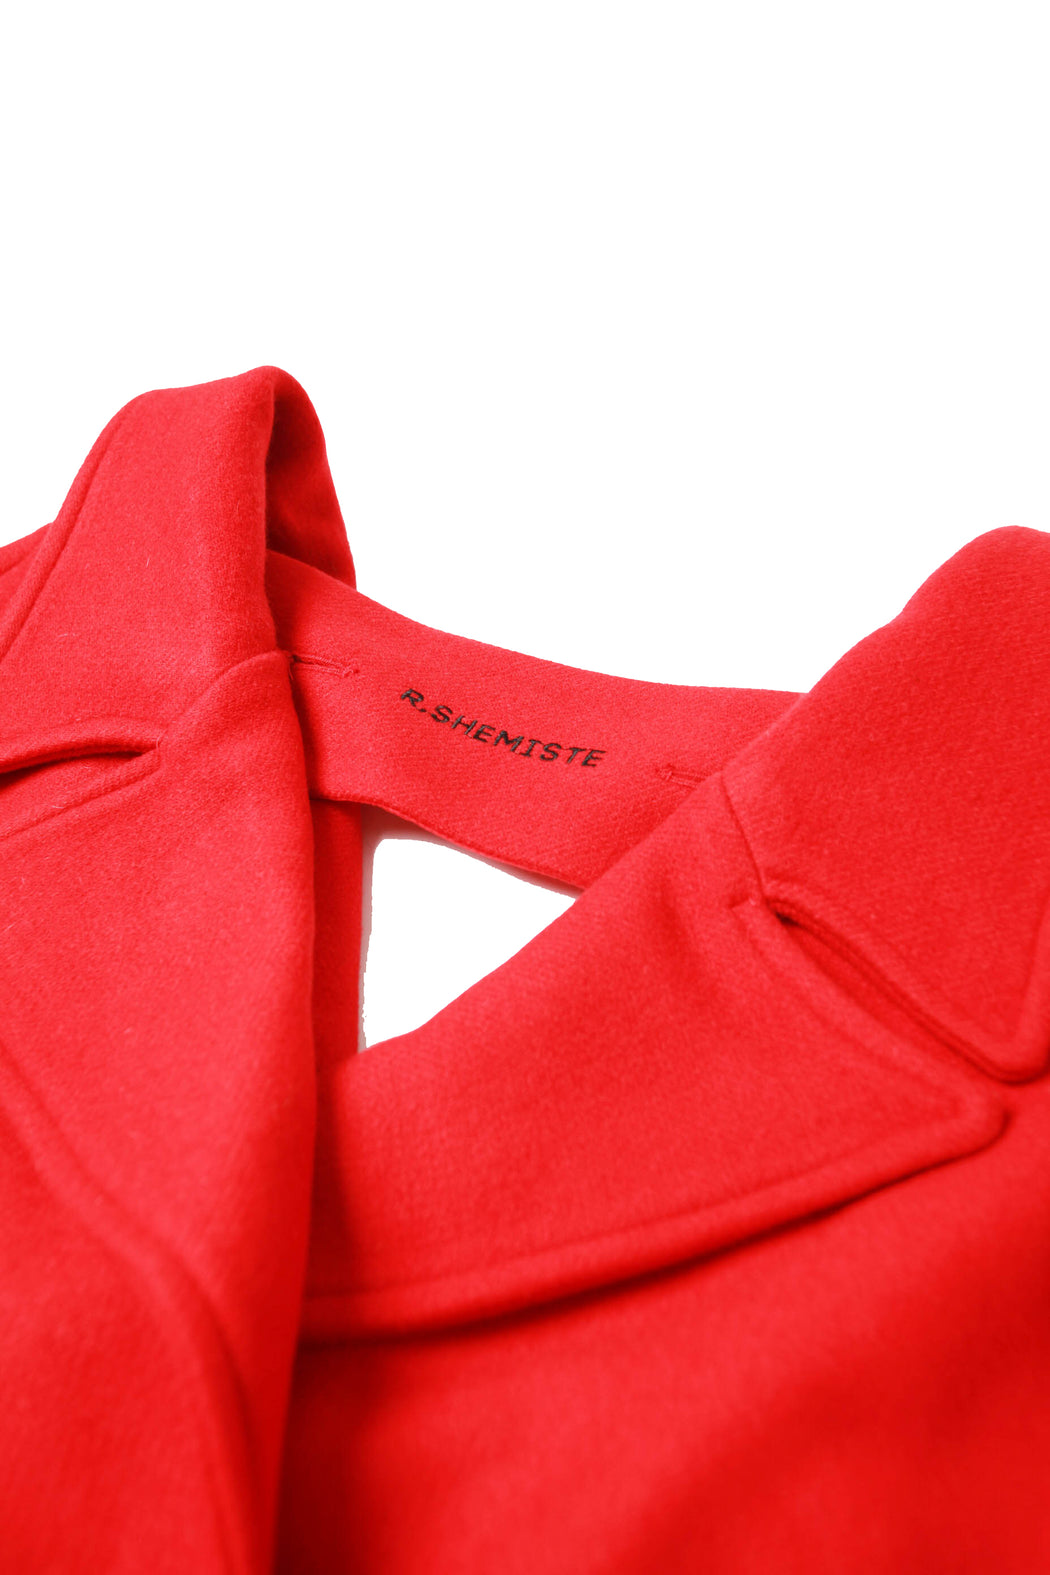 Red Outer Jacket